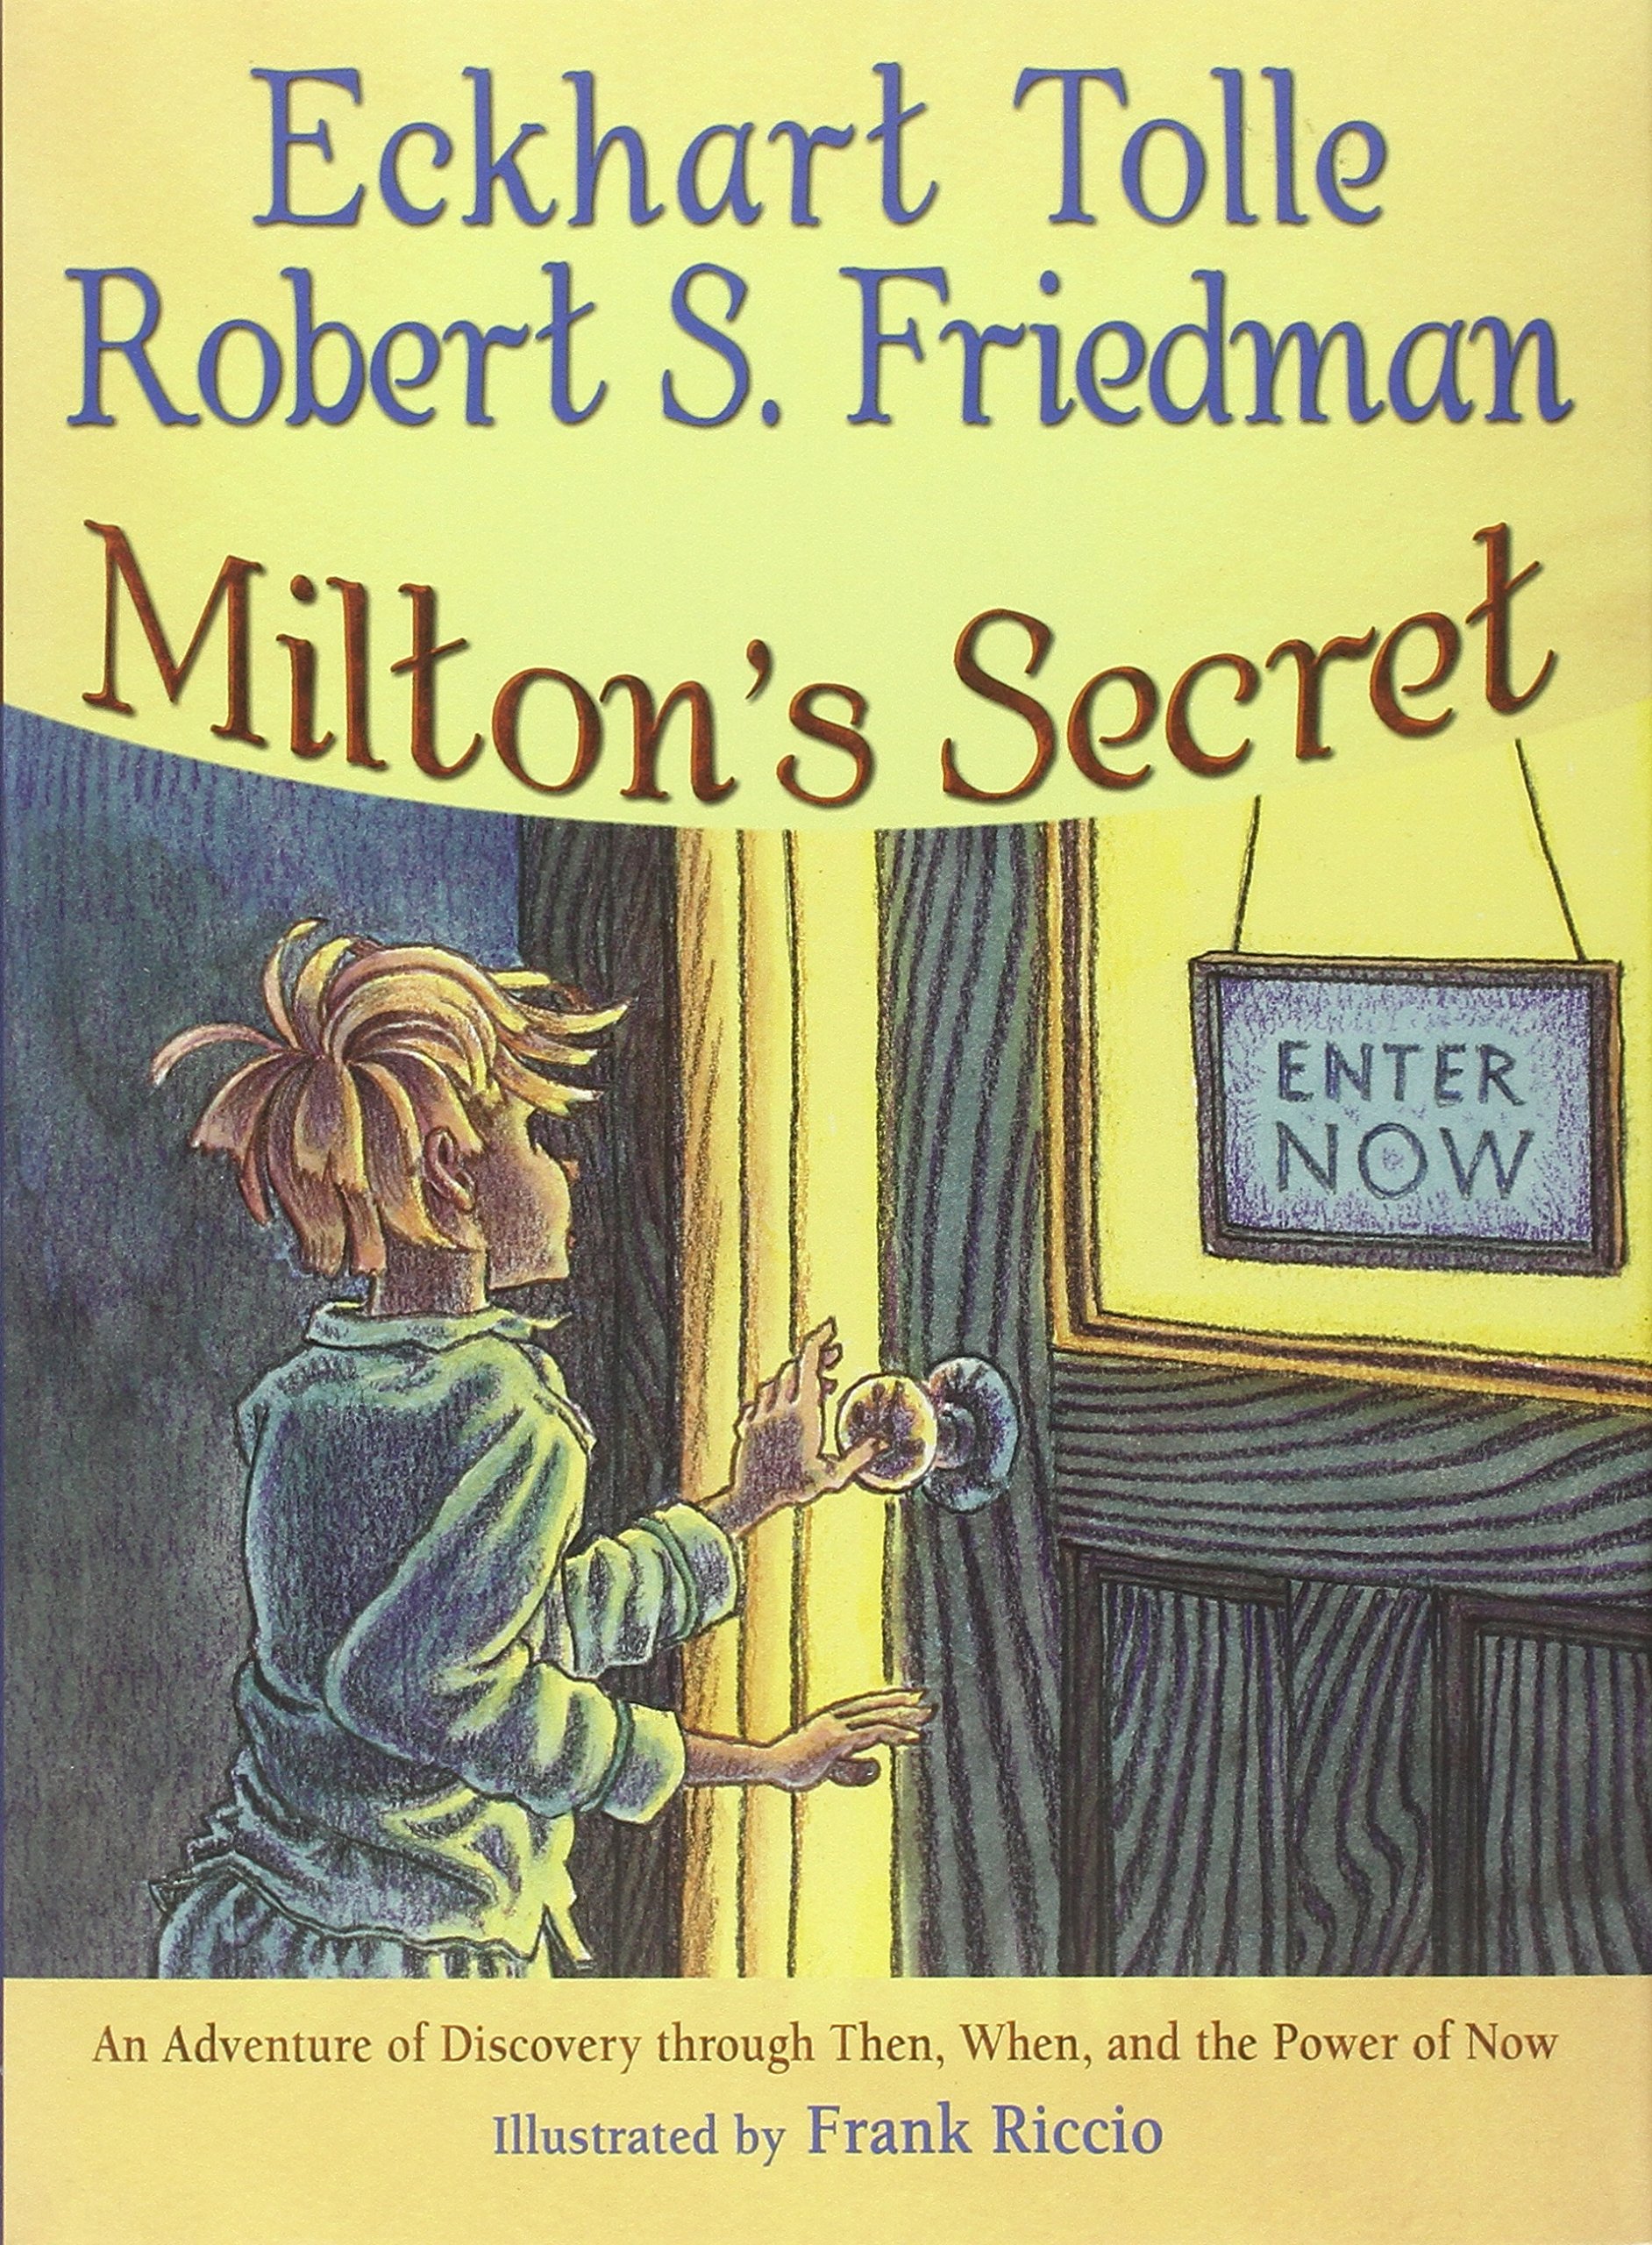 Milton's Secret: An Adventure of Discovery through Then, When, and the Power of Now